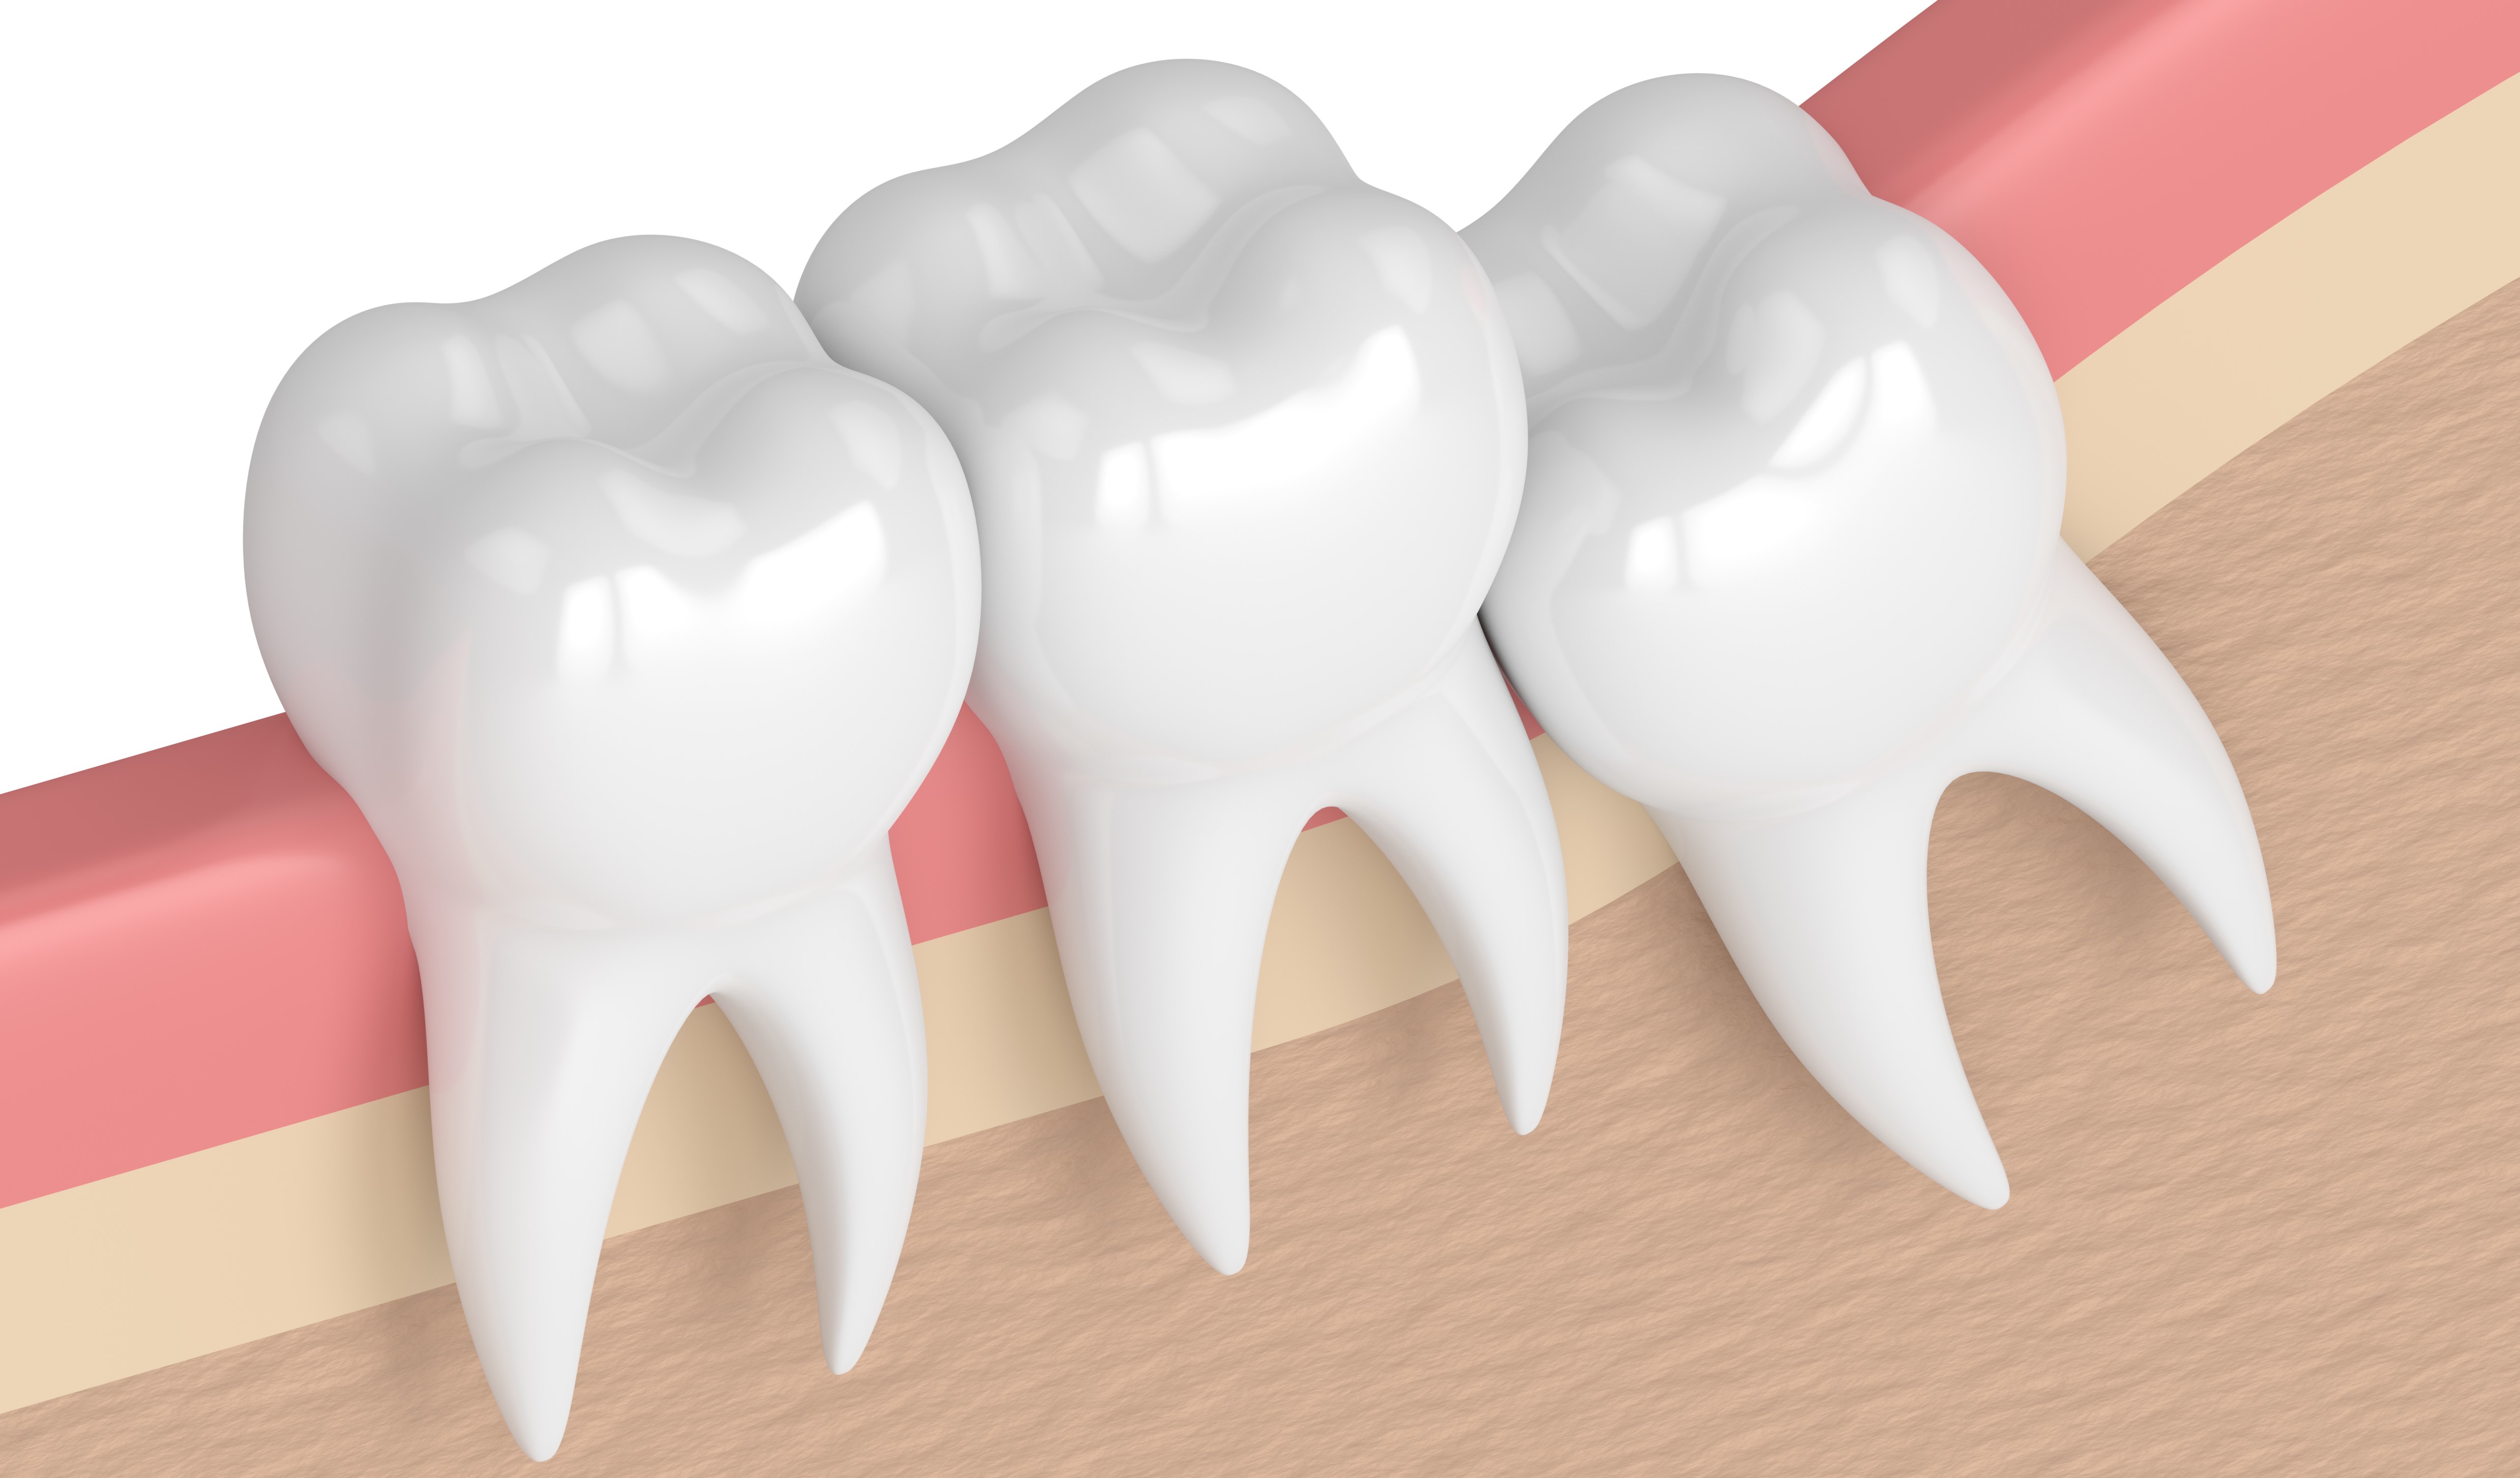 Dental extraction in Plano, Tx | Dental extraction in Garland, Tx